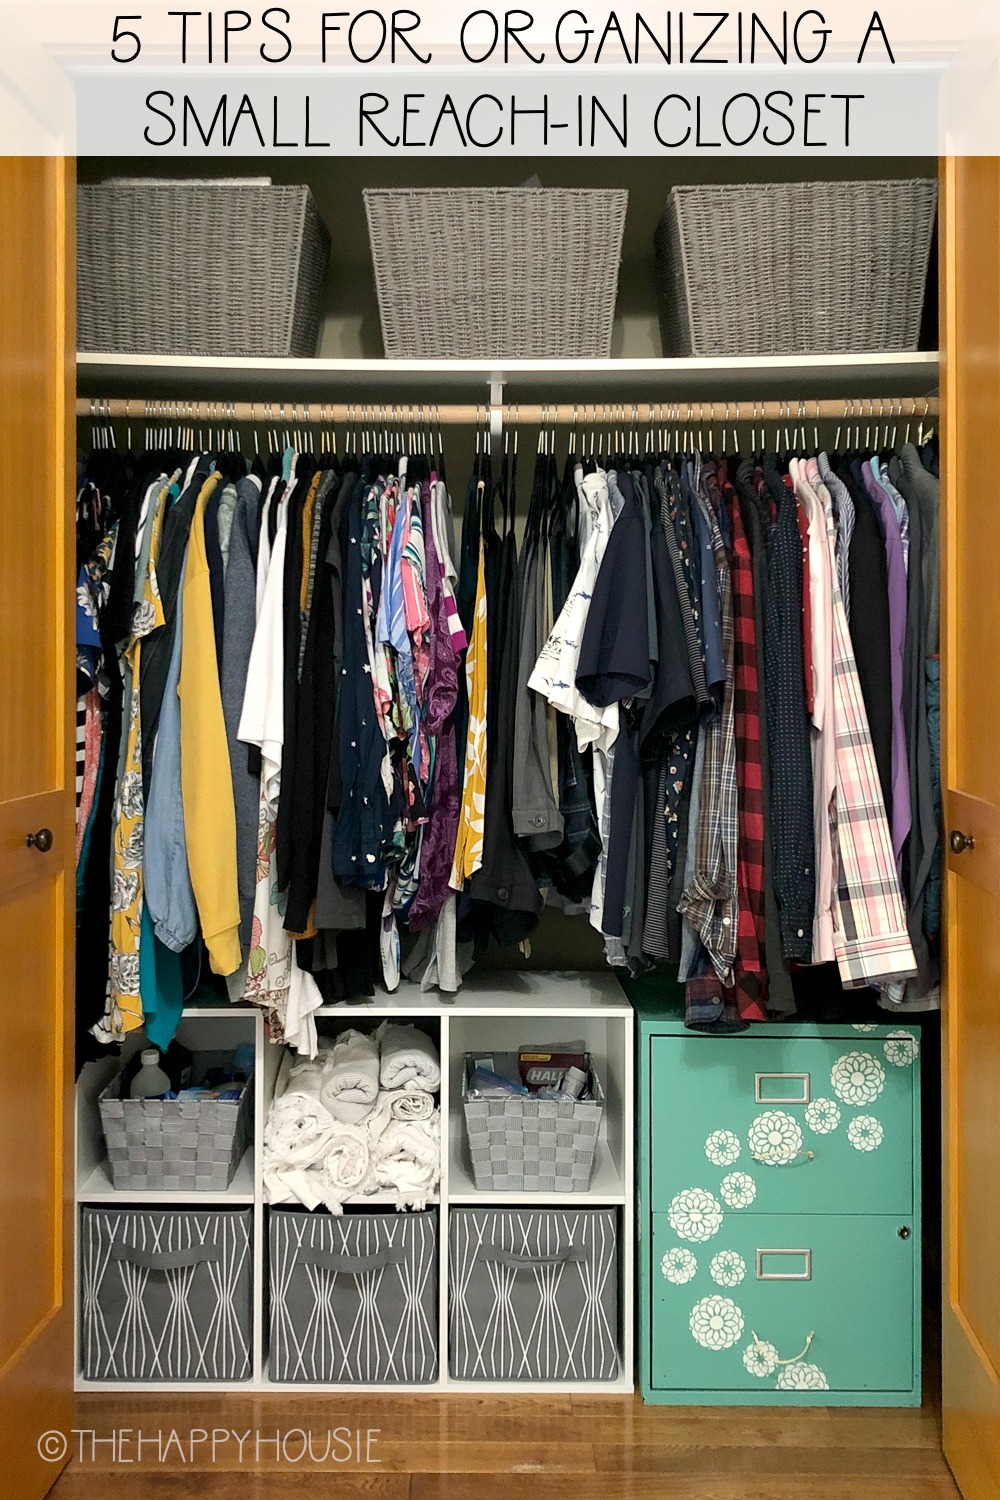 5 Tips For Organizing A Small Reach In Closet poster.